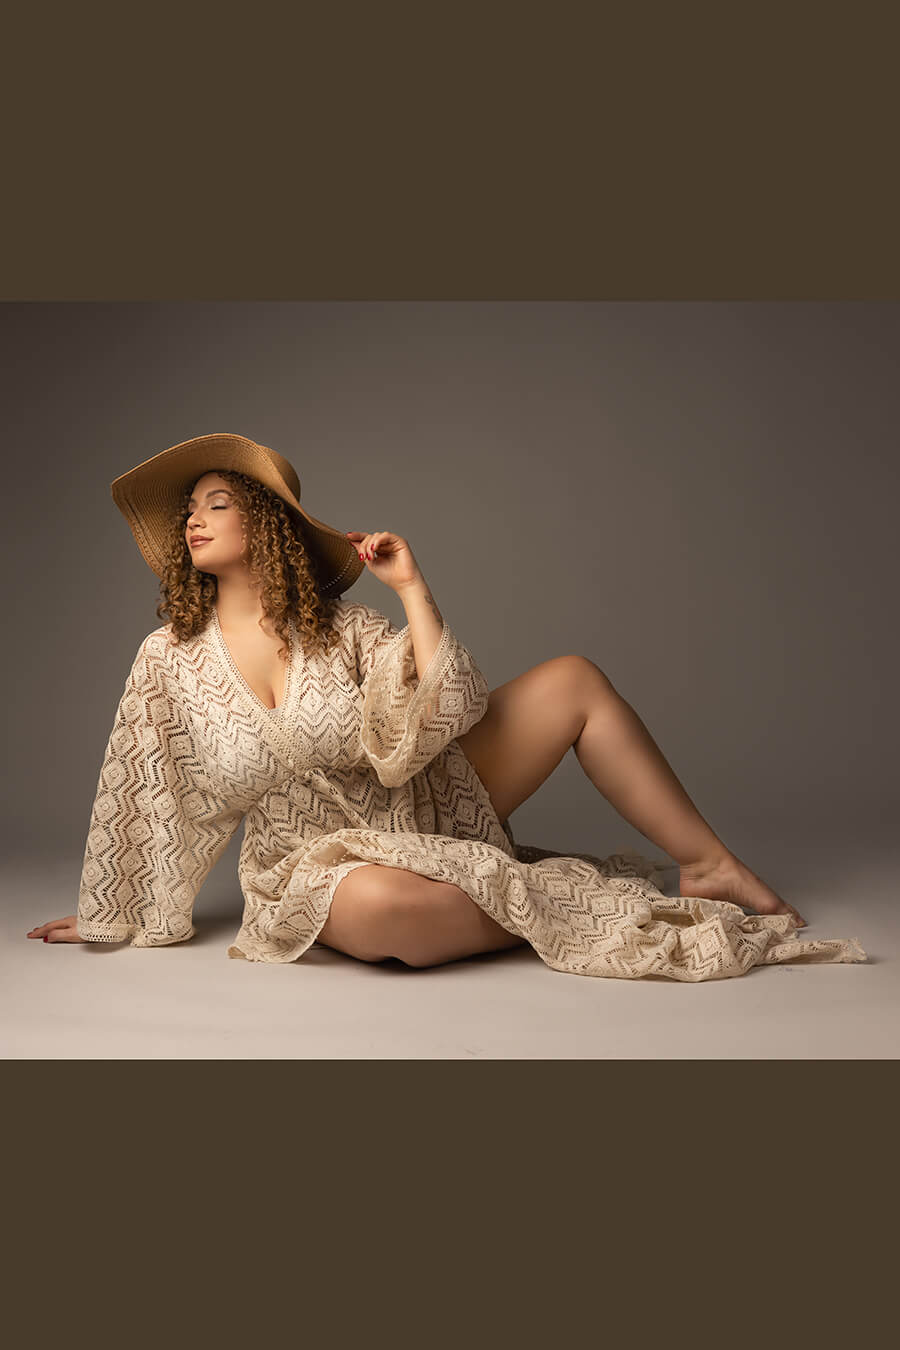 model poses sitting on the floor of a studio during a boho chic photoshoot. she has one hand on the floor and the other one touching the hat. her legs can be seen through the asymmetrical skirt. 